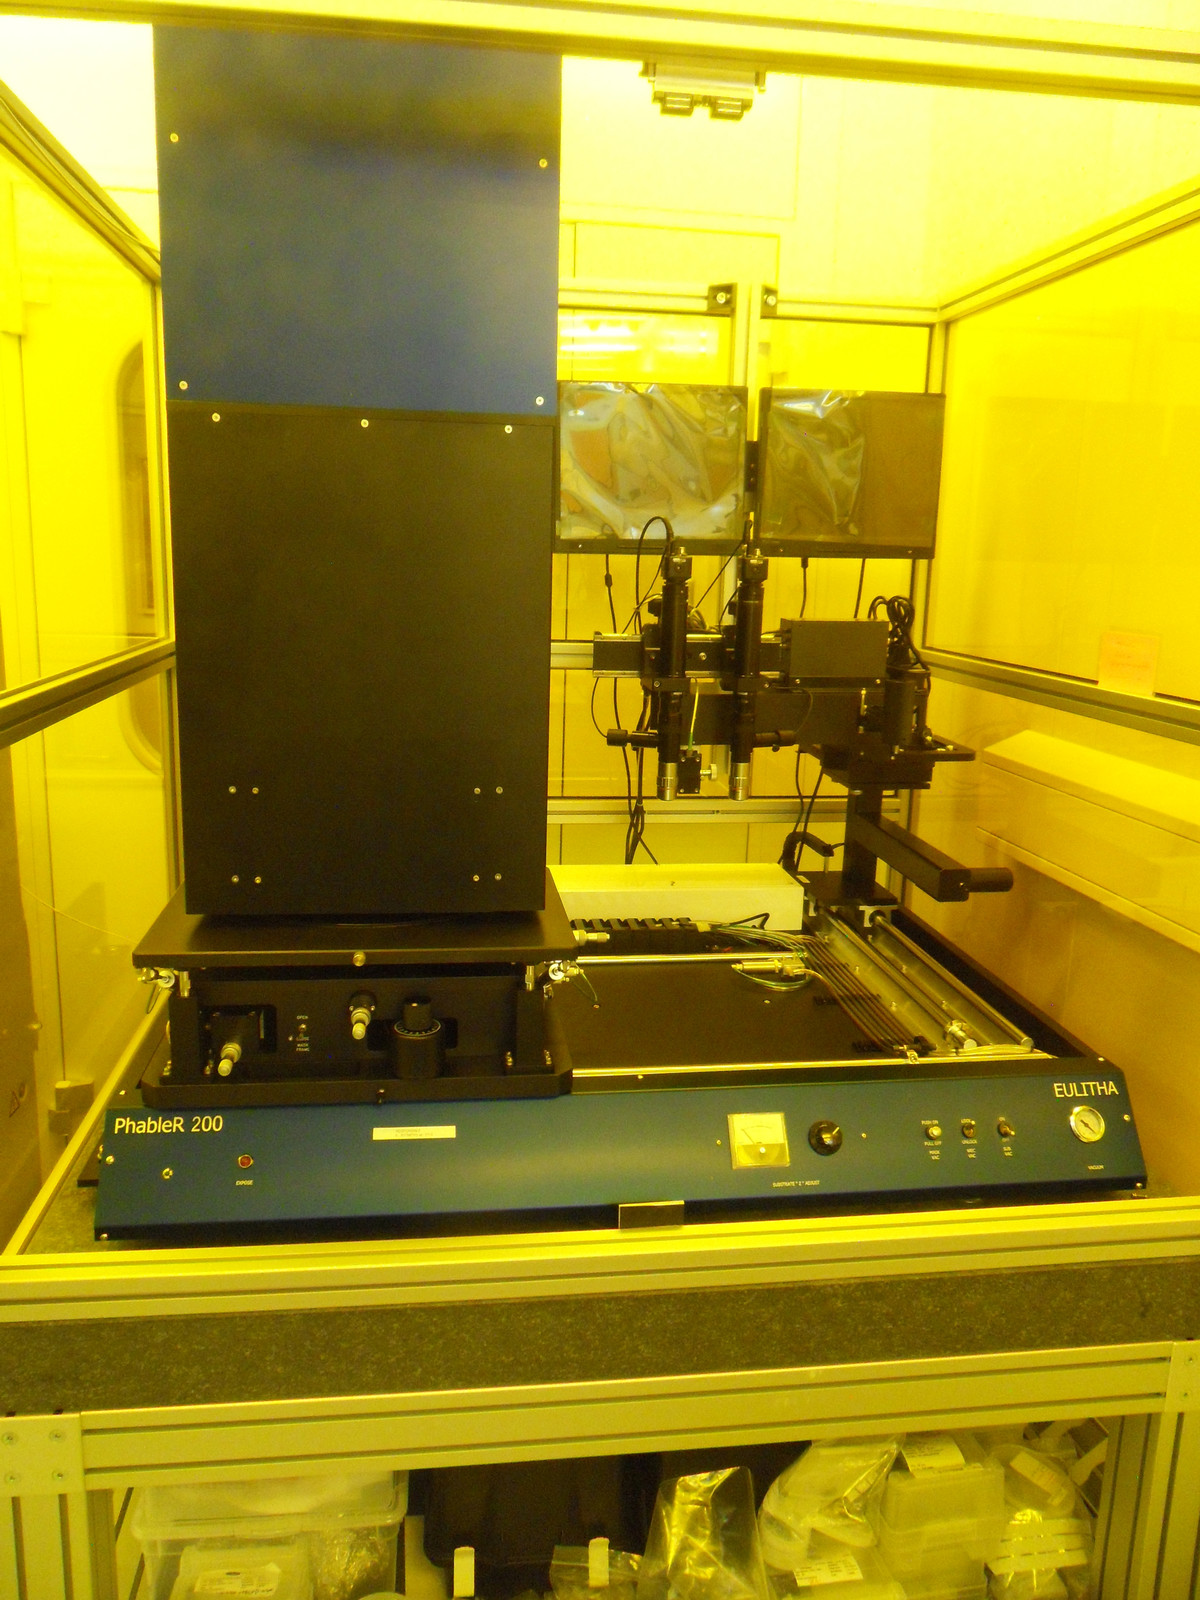 Phable R200: Talbot interference Lithography